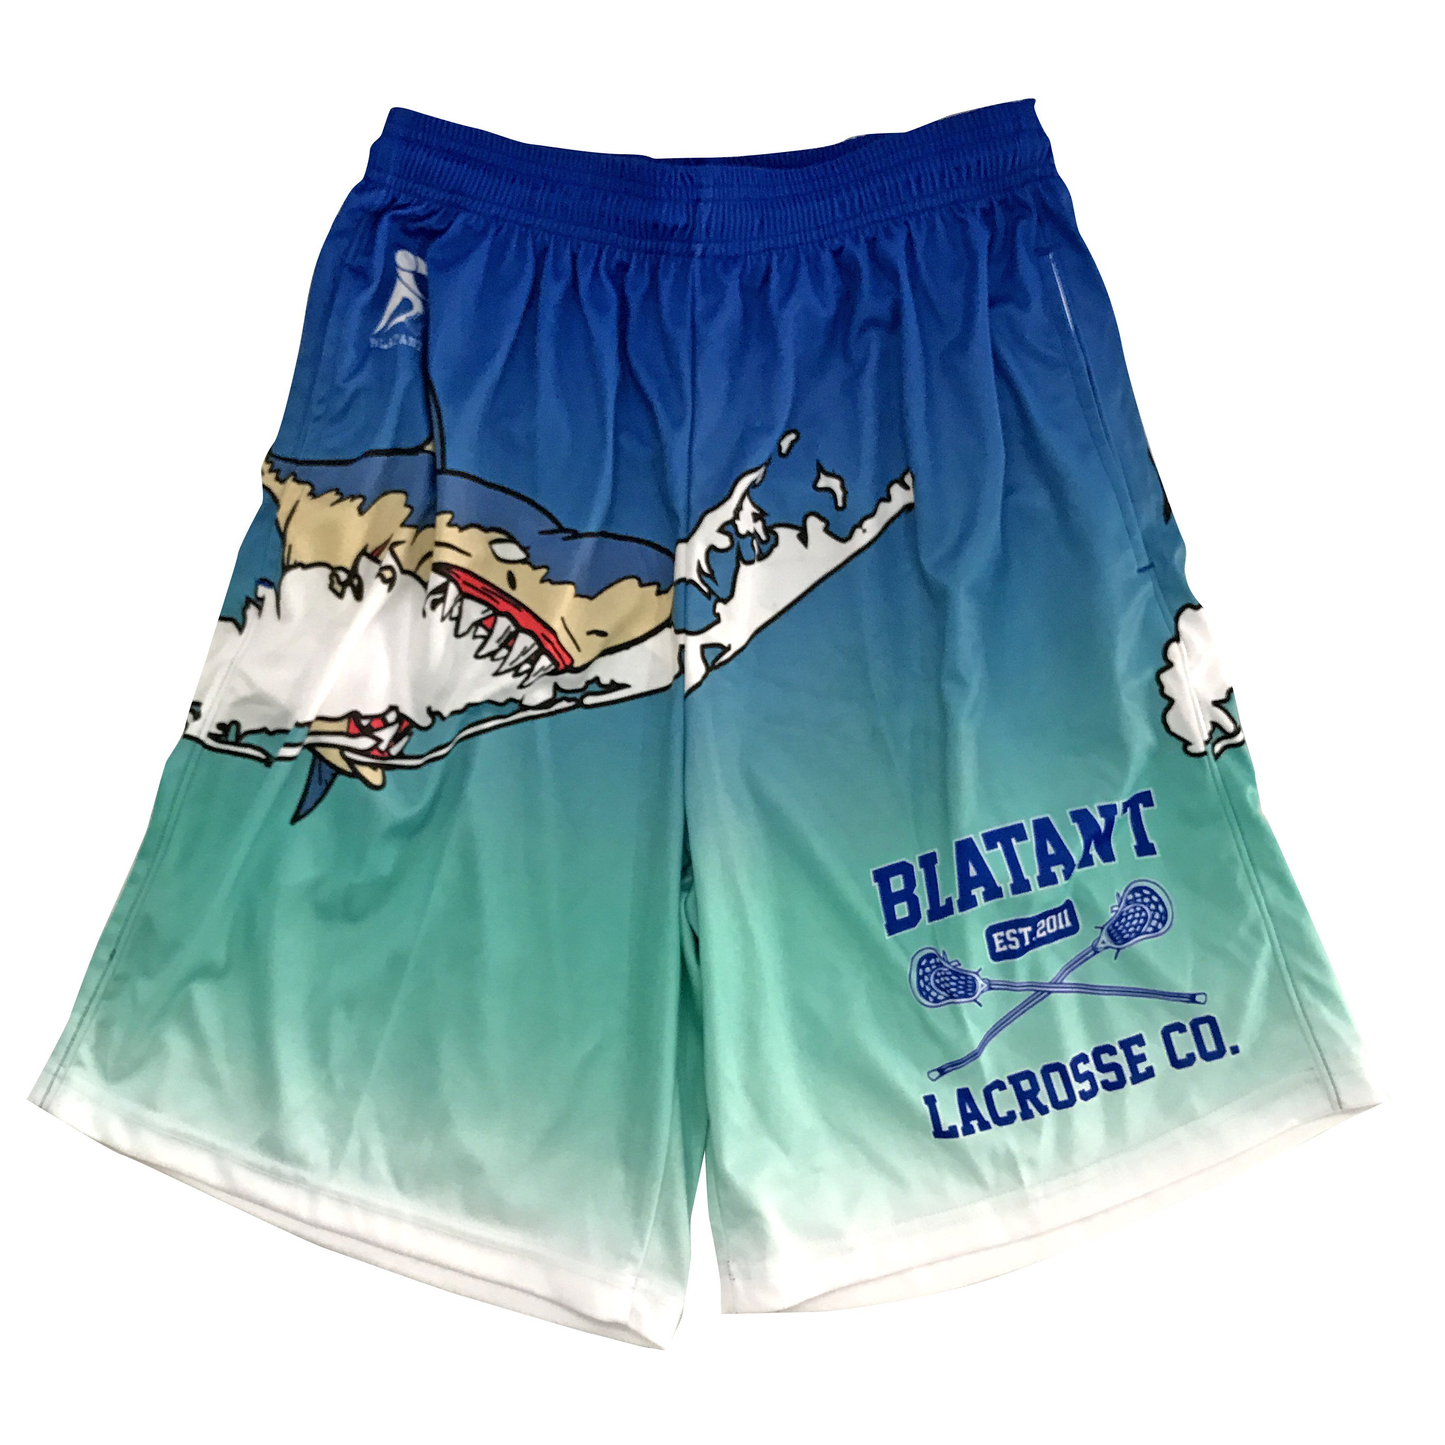 Lacrosse Shorts Nautical Collection: The Shark